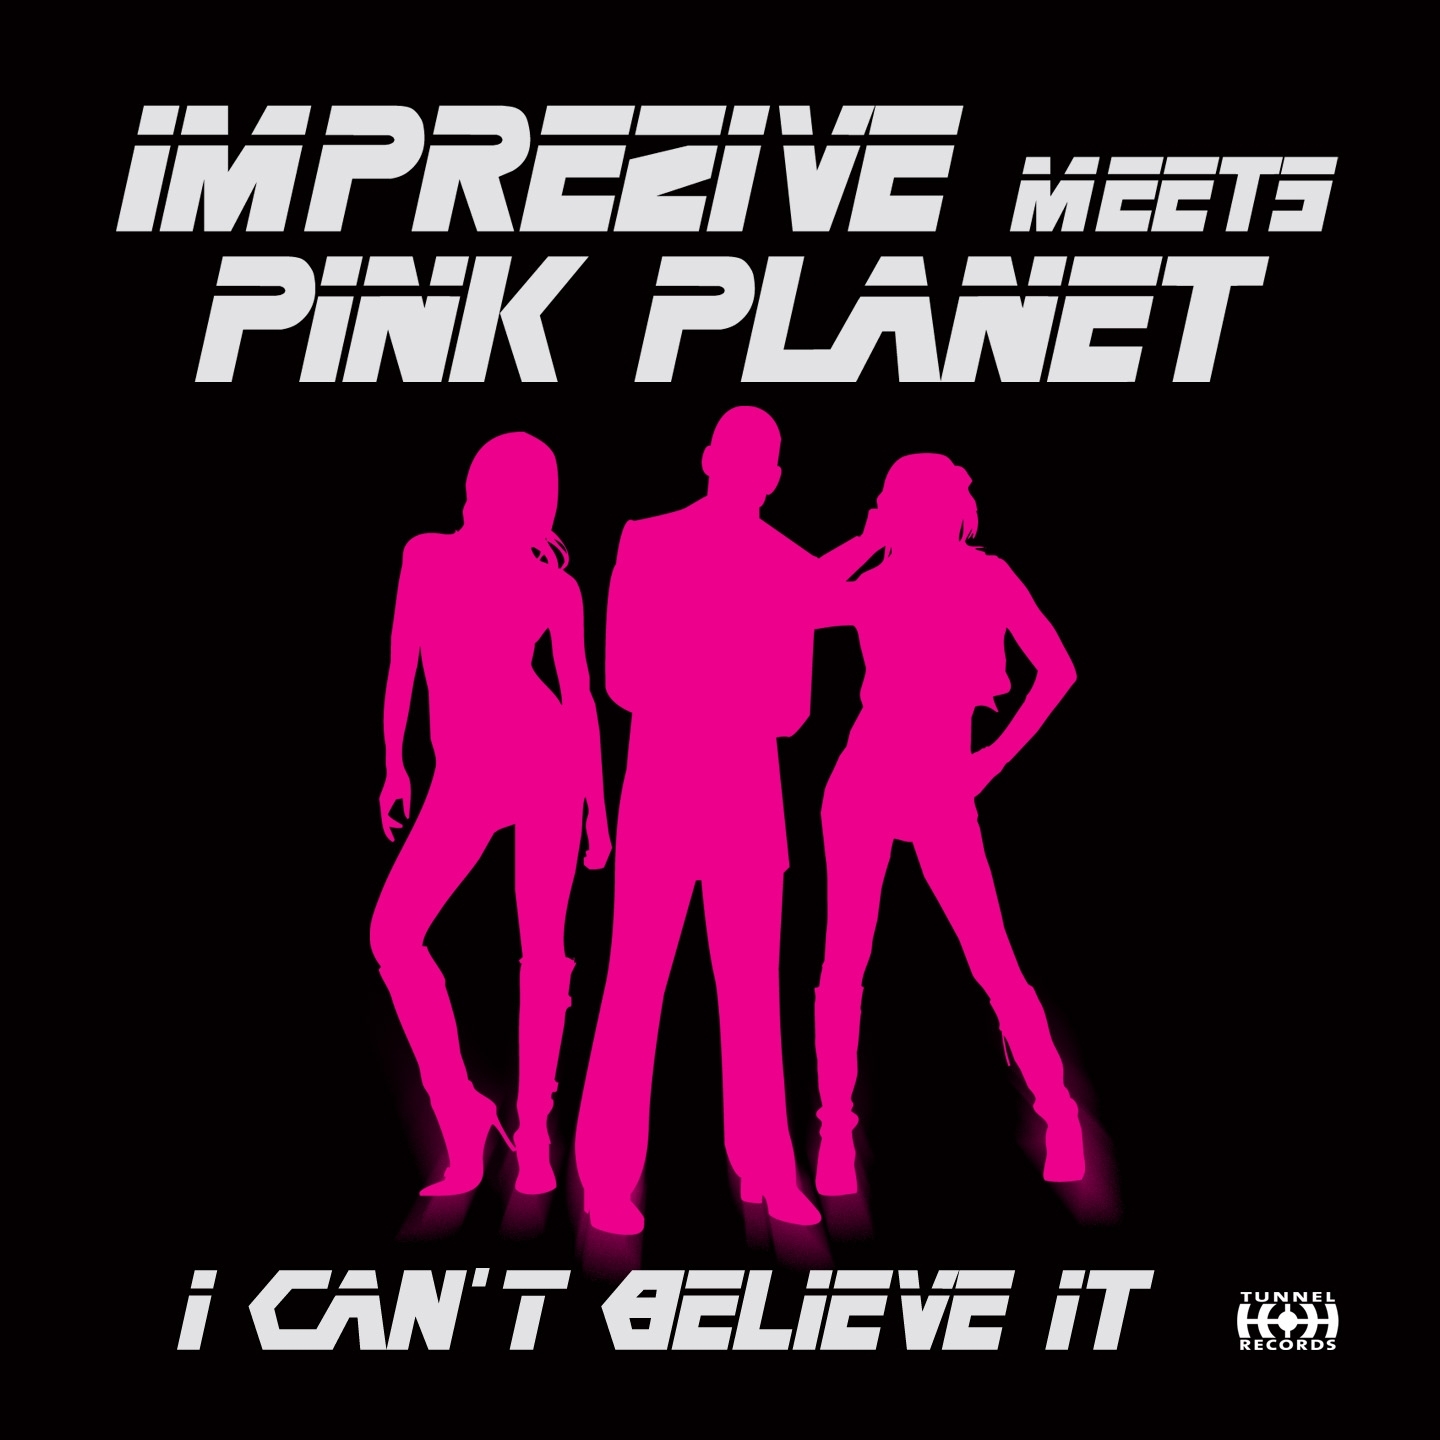 I Can't Believe It (Imprezive Meets Pink Planet)